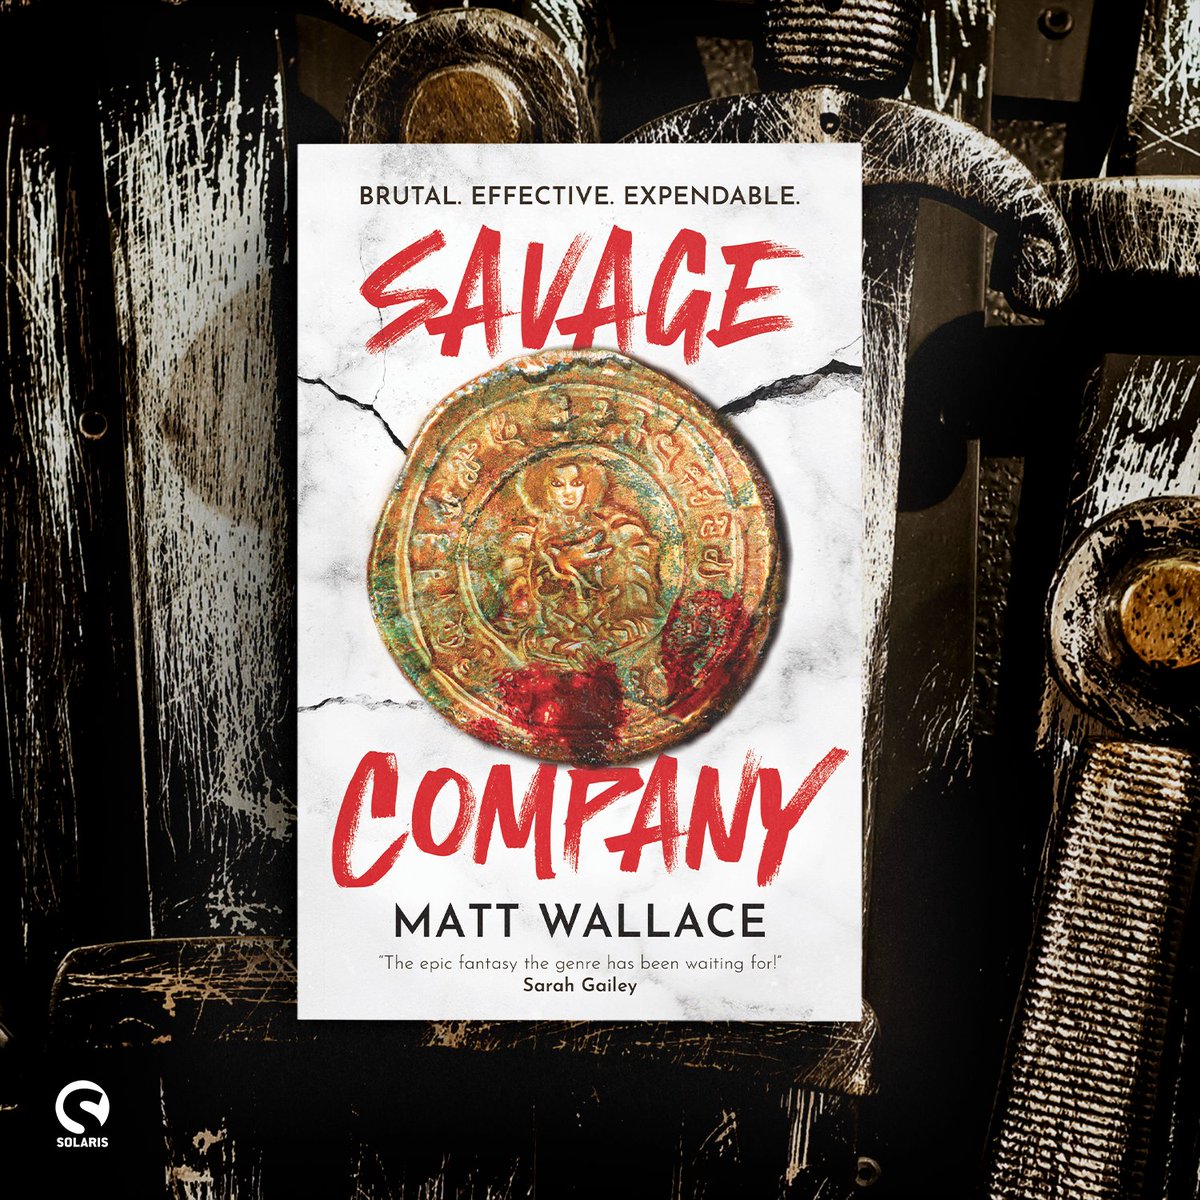 🎂 🎉 SAVAGE COMPANY by Matt Wallace has been out in the UK for one week today! The first book in an epic fantasy trilogy by Hugo Award-winner @MattFnWallace about a utopian city with a dark secret and the underdogs who will expose it, or die trying. geni.us/savagecompany